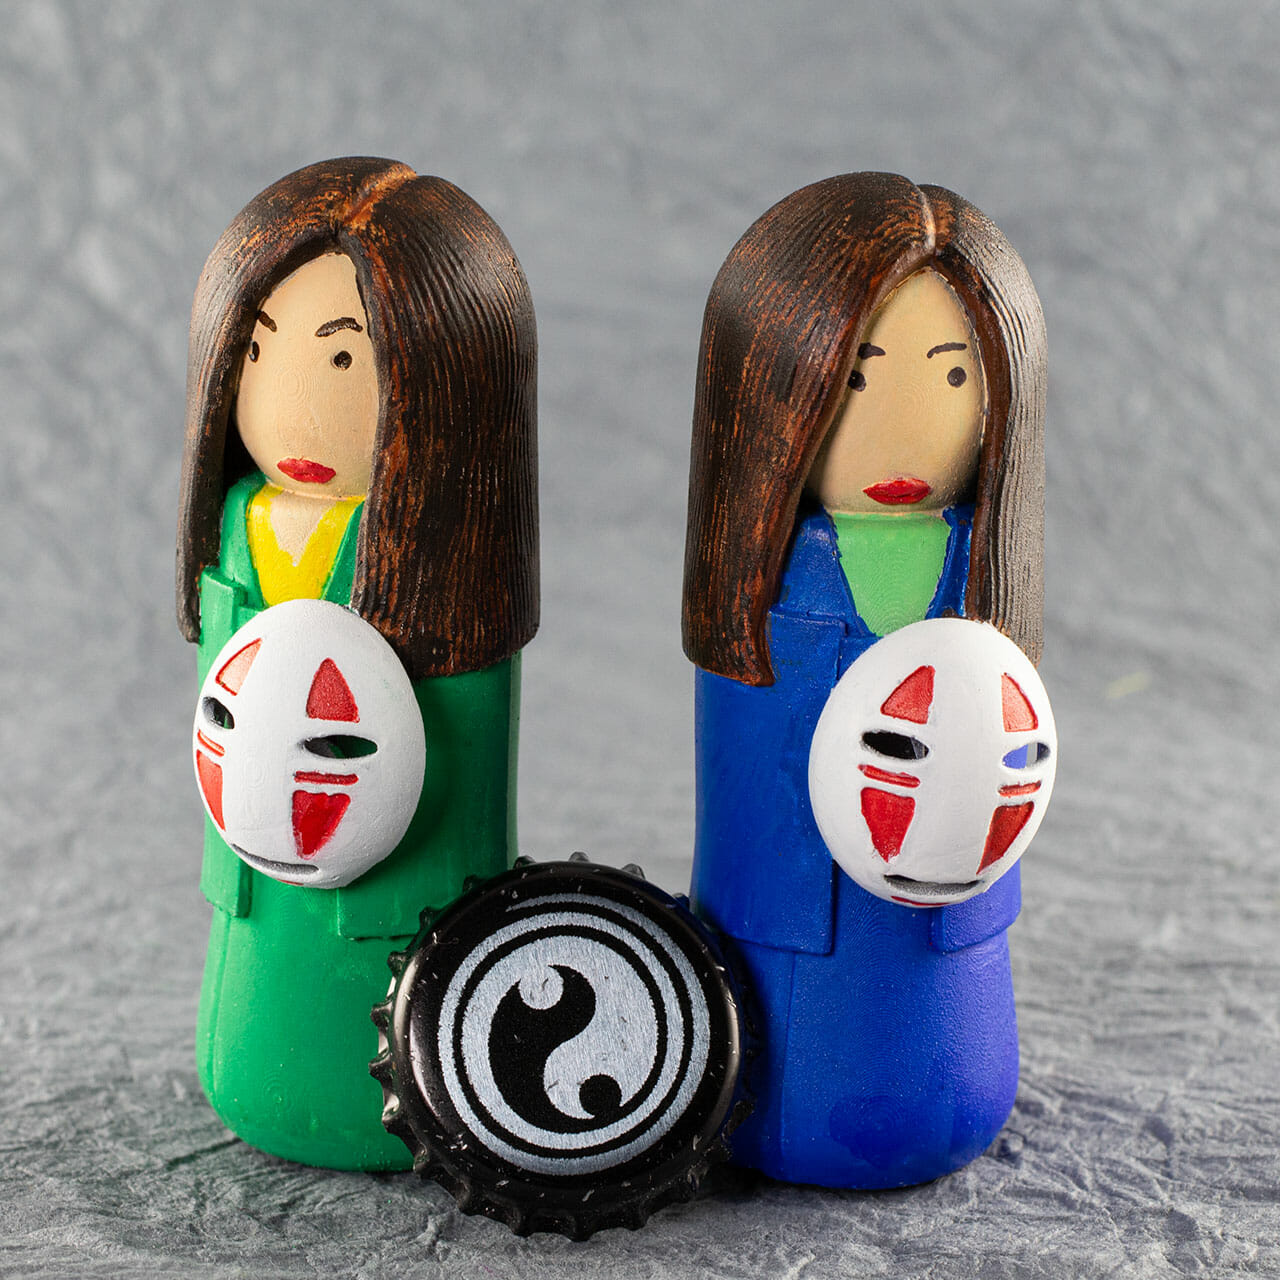 Two small kokeshi (a traditional style of Japanese doll), painted by hand. One has a bright green kimono, the other is blue. Simple facial features. Long brown hair. They are each holding a No Face mask from the animated film Spirited Away. Bottle cap for scale.